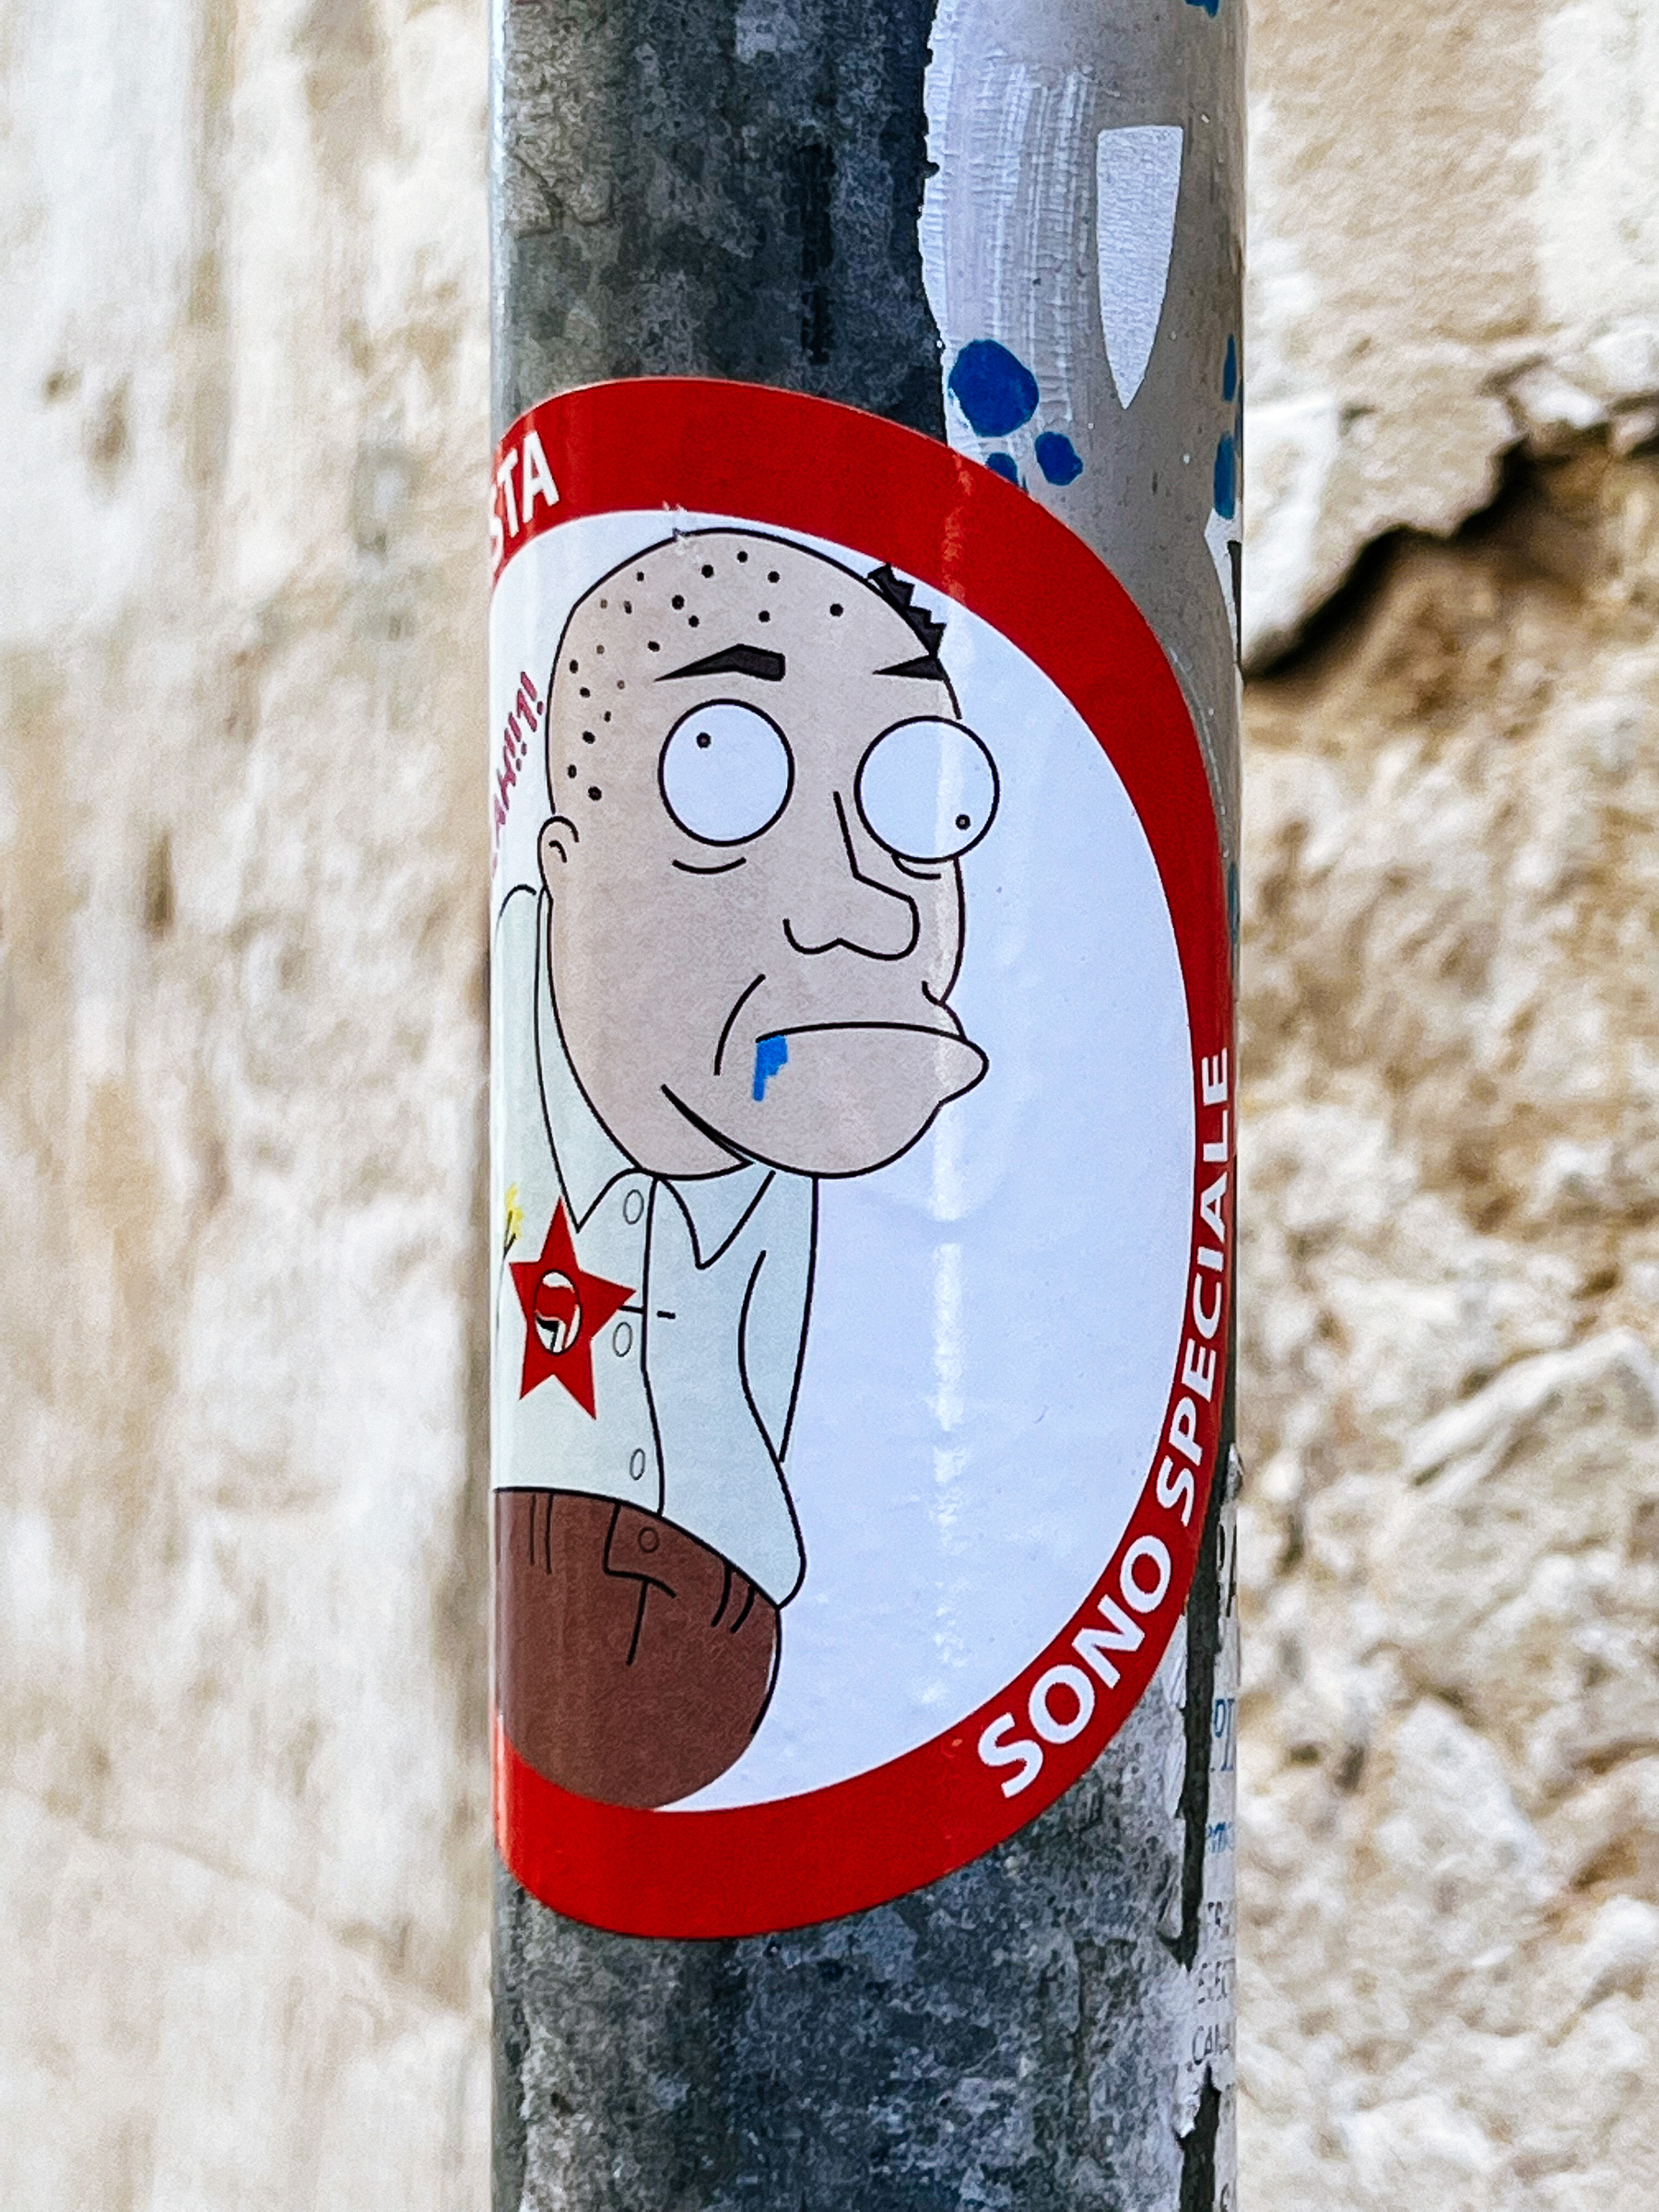 “Sono Speciale”, sticker with a drooling man. 